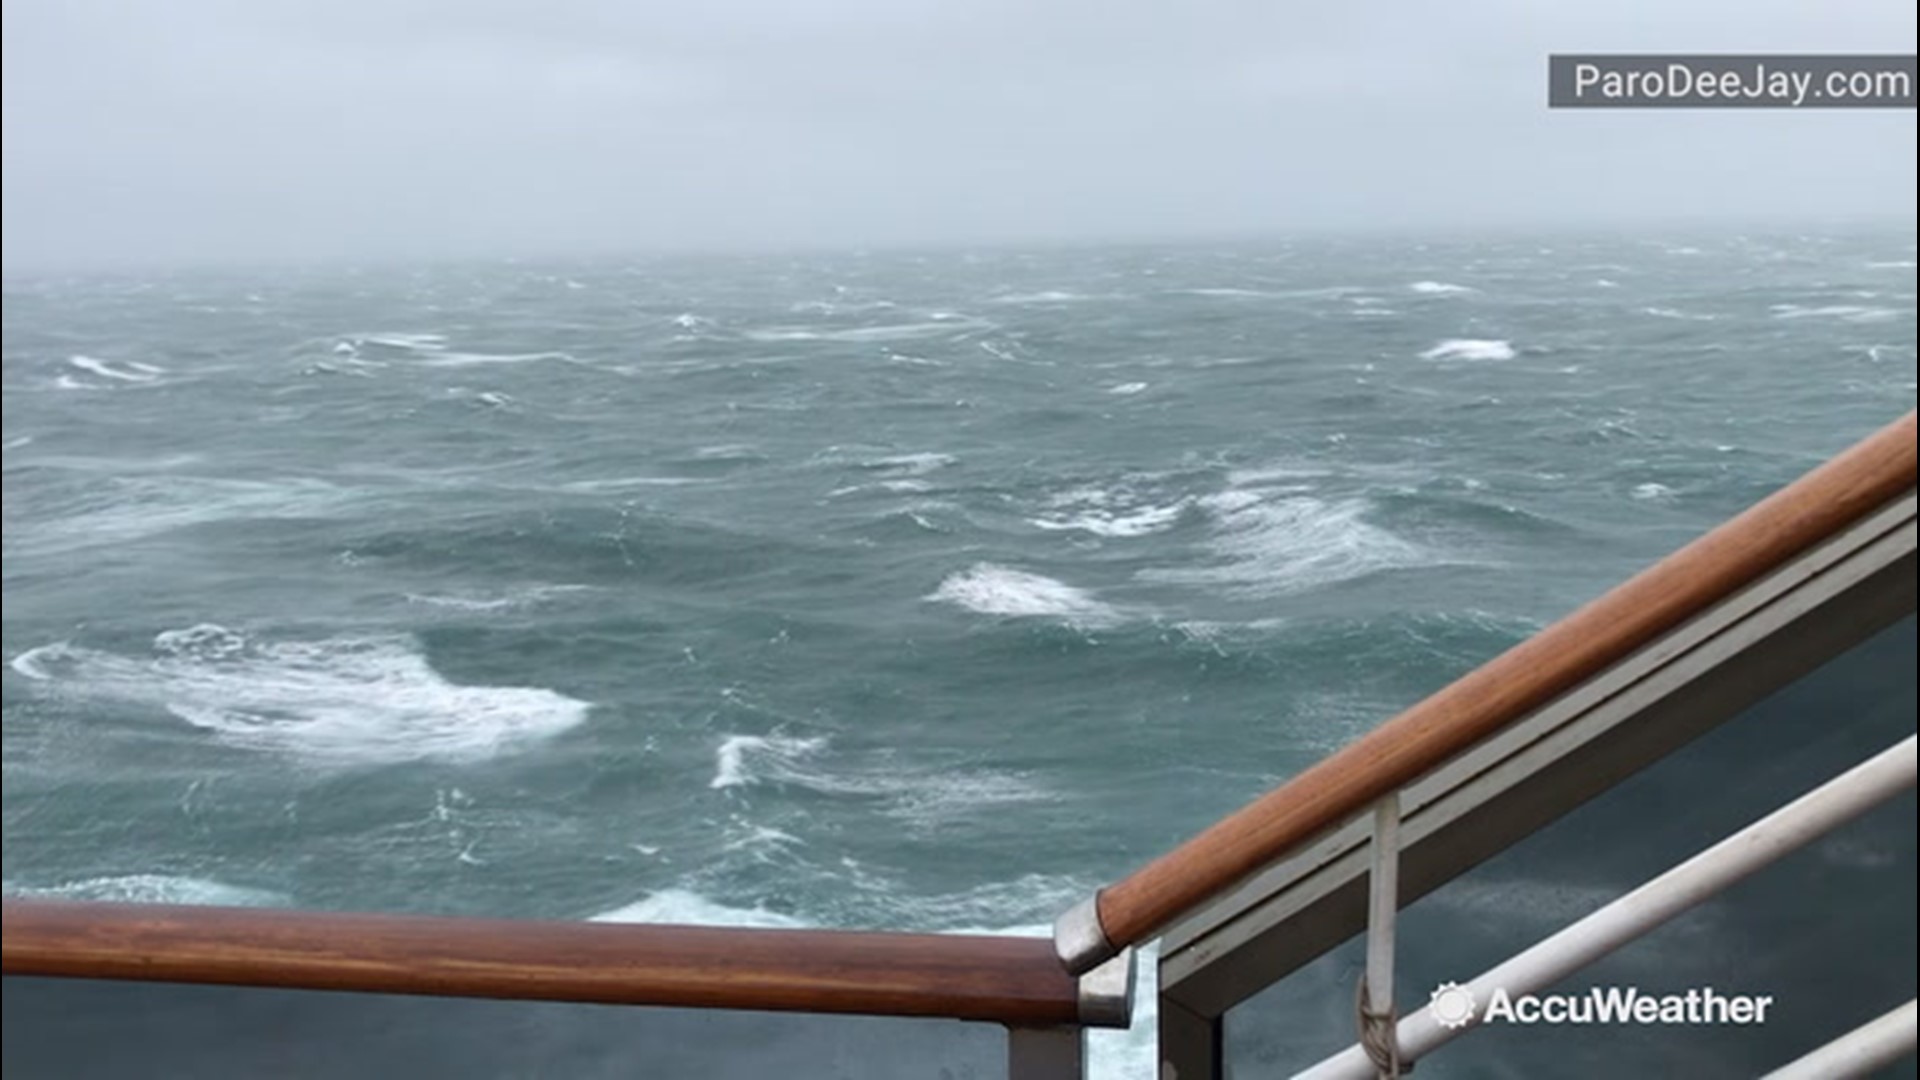 A cruise ship off the coast of North Carolina had a rough time on Nov. 17, when they had to deal with the winds and waves of a powerful nor'easter.